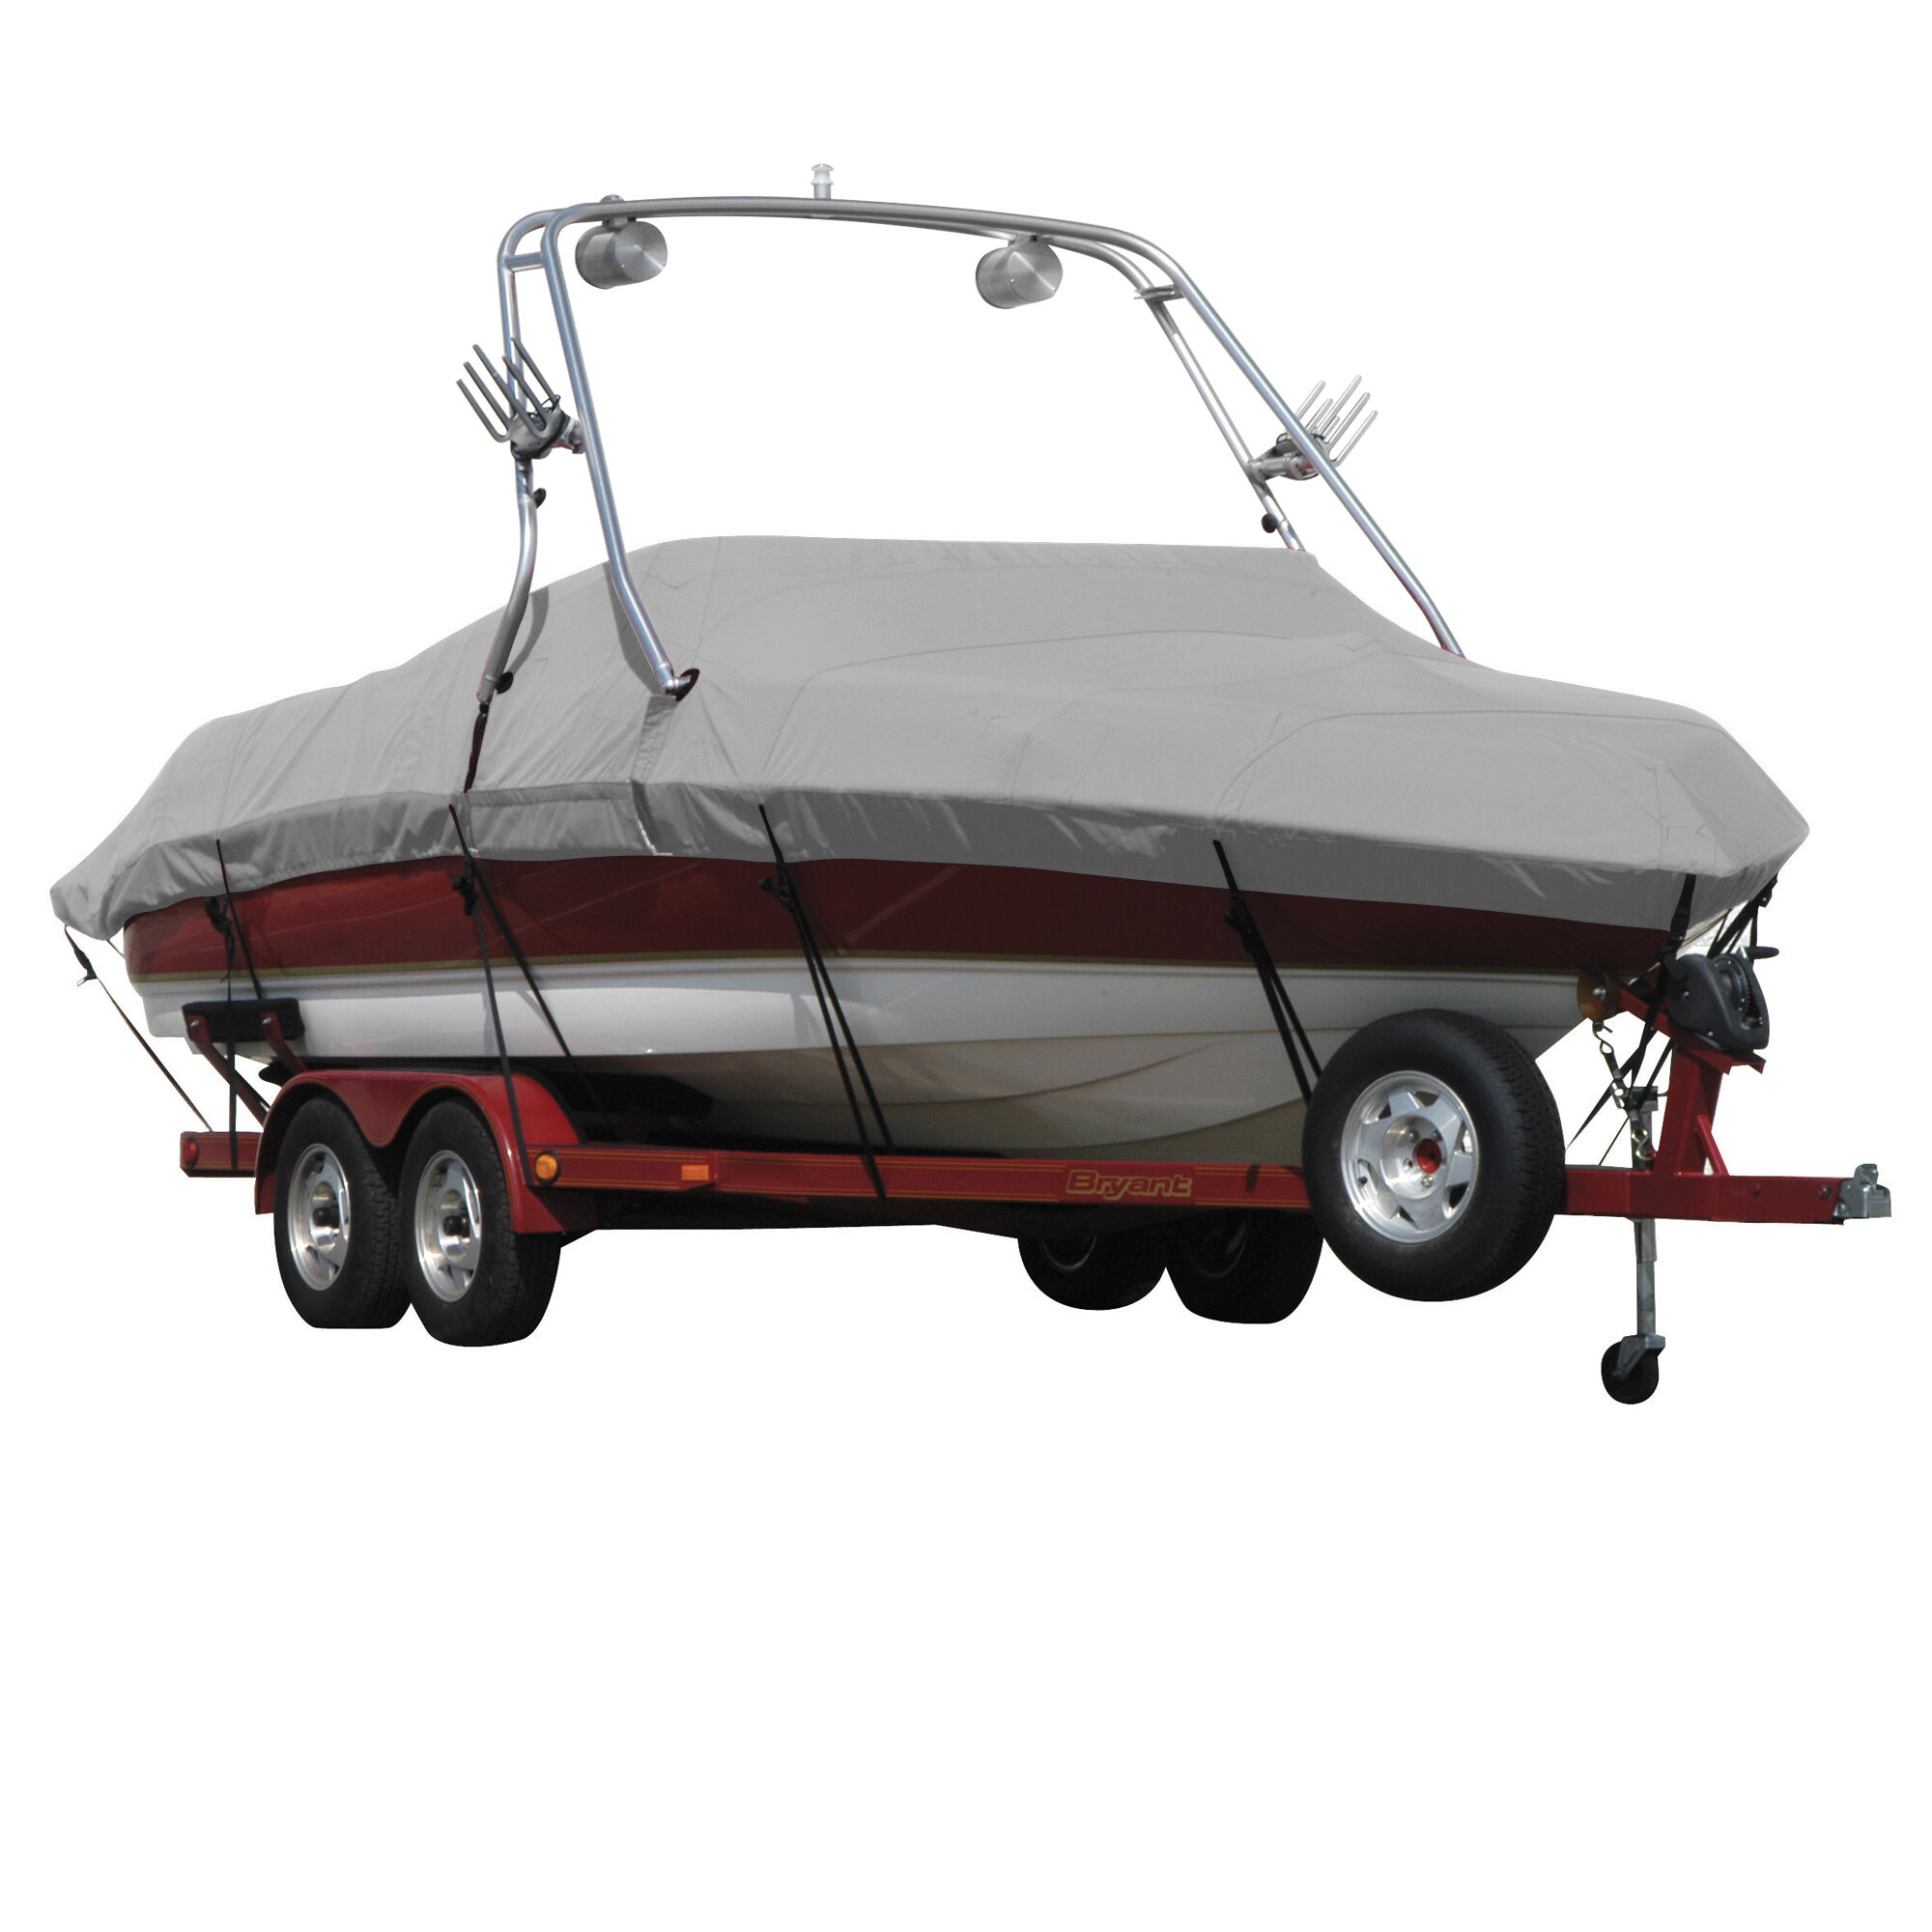 Covermate MALIBU RIDE 21 I ILLSN X TOWER DOES NOT Boat Cover in Grey